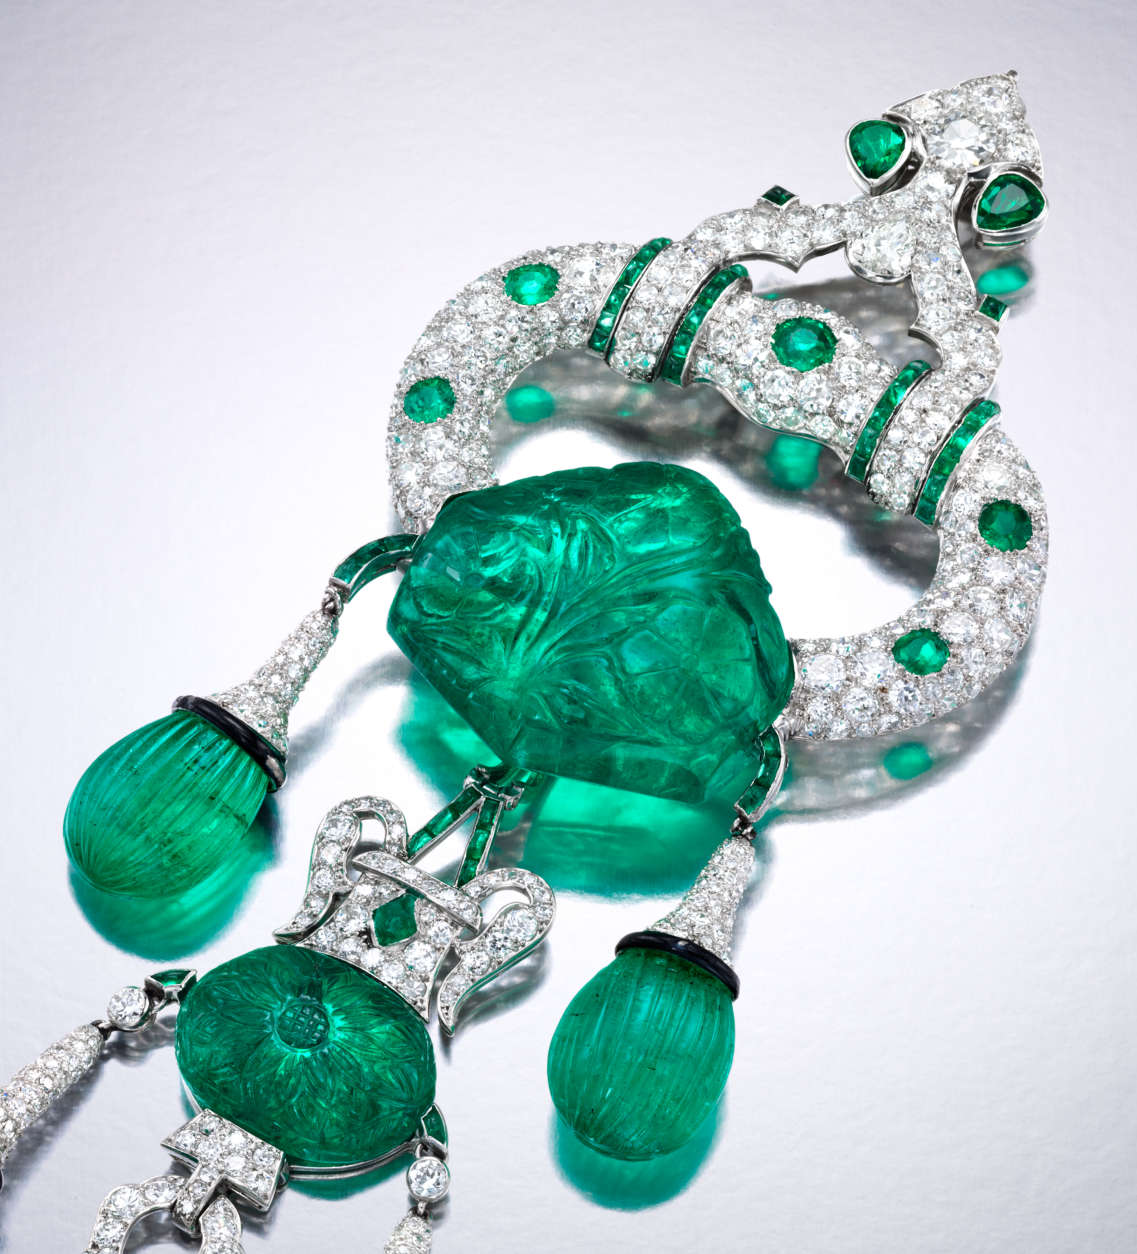 A 1928 Cartier emerald and diamond brooch from “Spectacular Gems and Jewelry from the Merriweather Post Collection." (Photo by Square Moose Inc., courtesy Hillwood Estate, Museum & Gardens) 